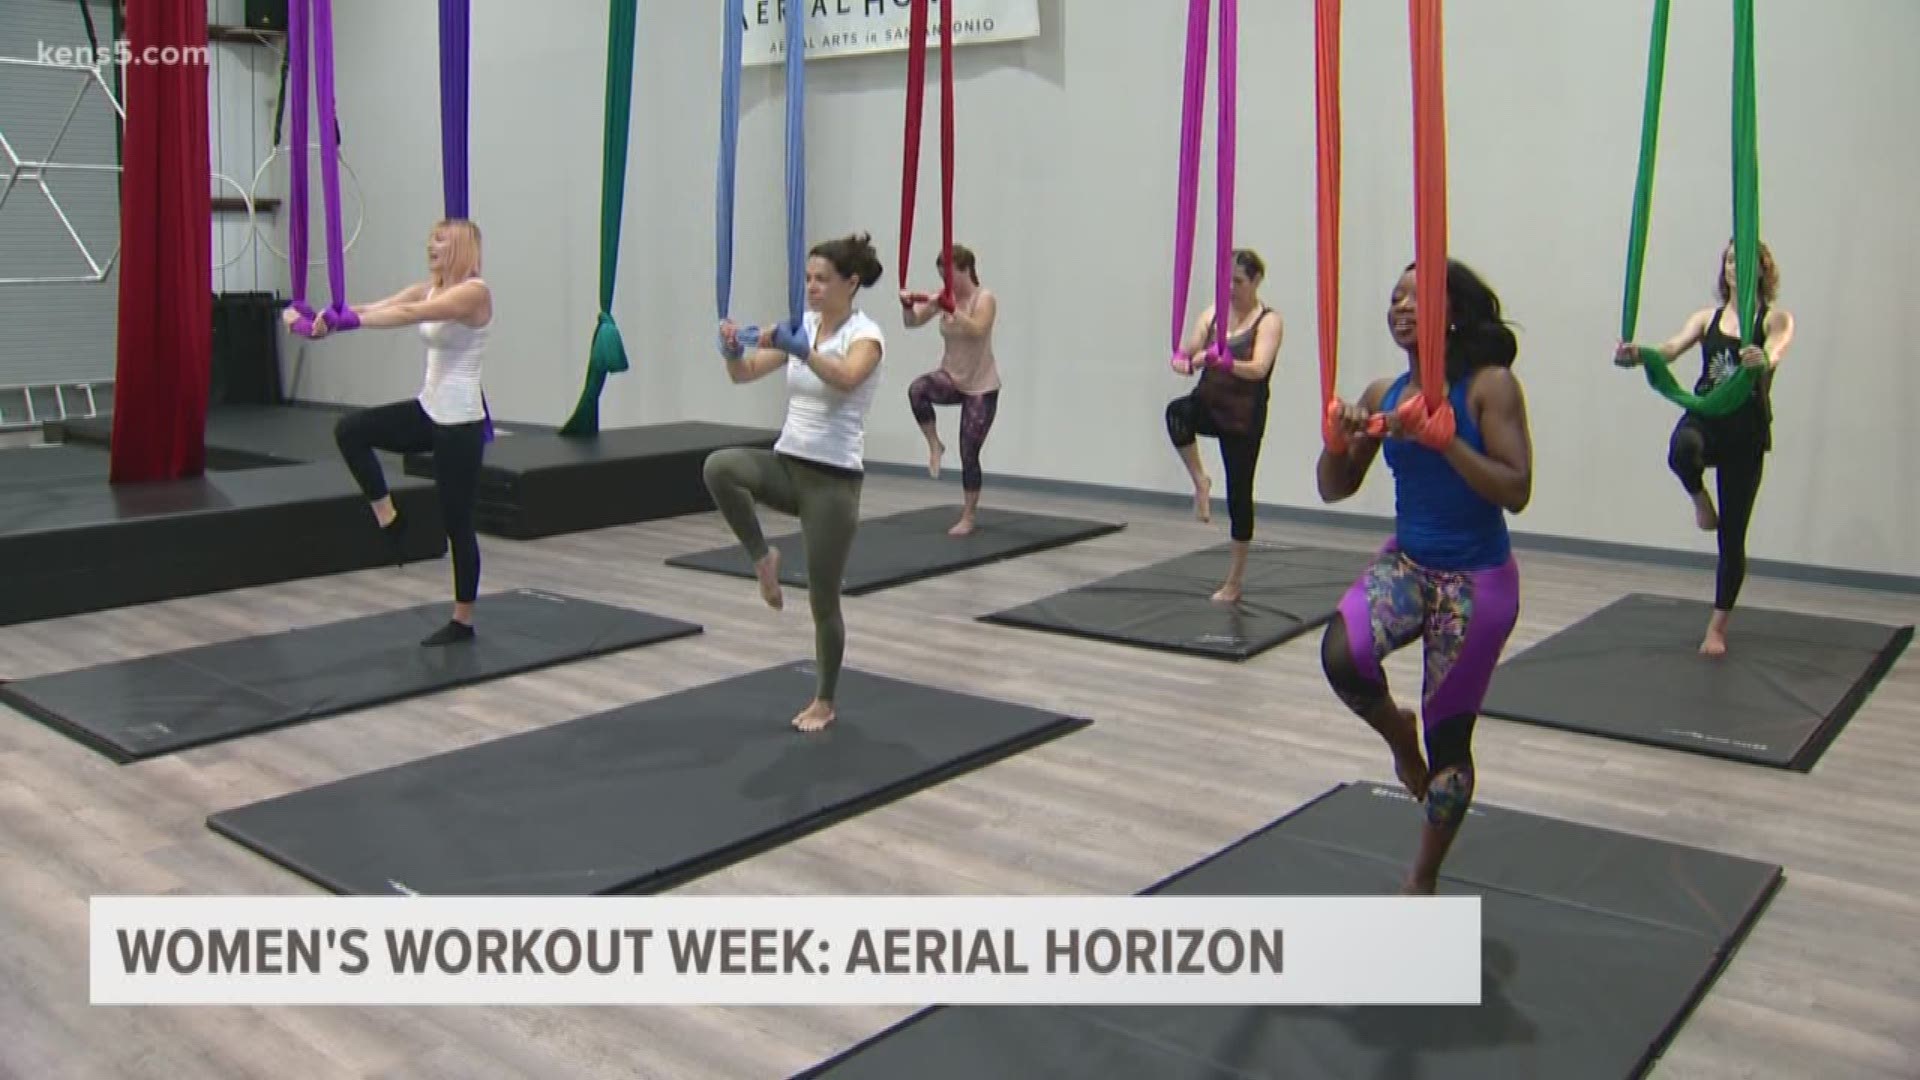 Do you ever want to fly or find out what it takes to be in the circus? There is a special gym in town that gives you the chance to do both while sculpting your body all at the same time. Aerial Horizon is the only one of its kind in San Antonio.